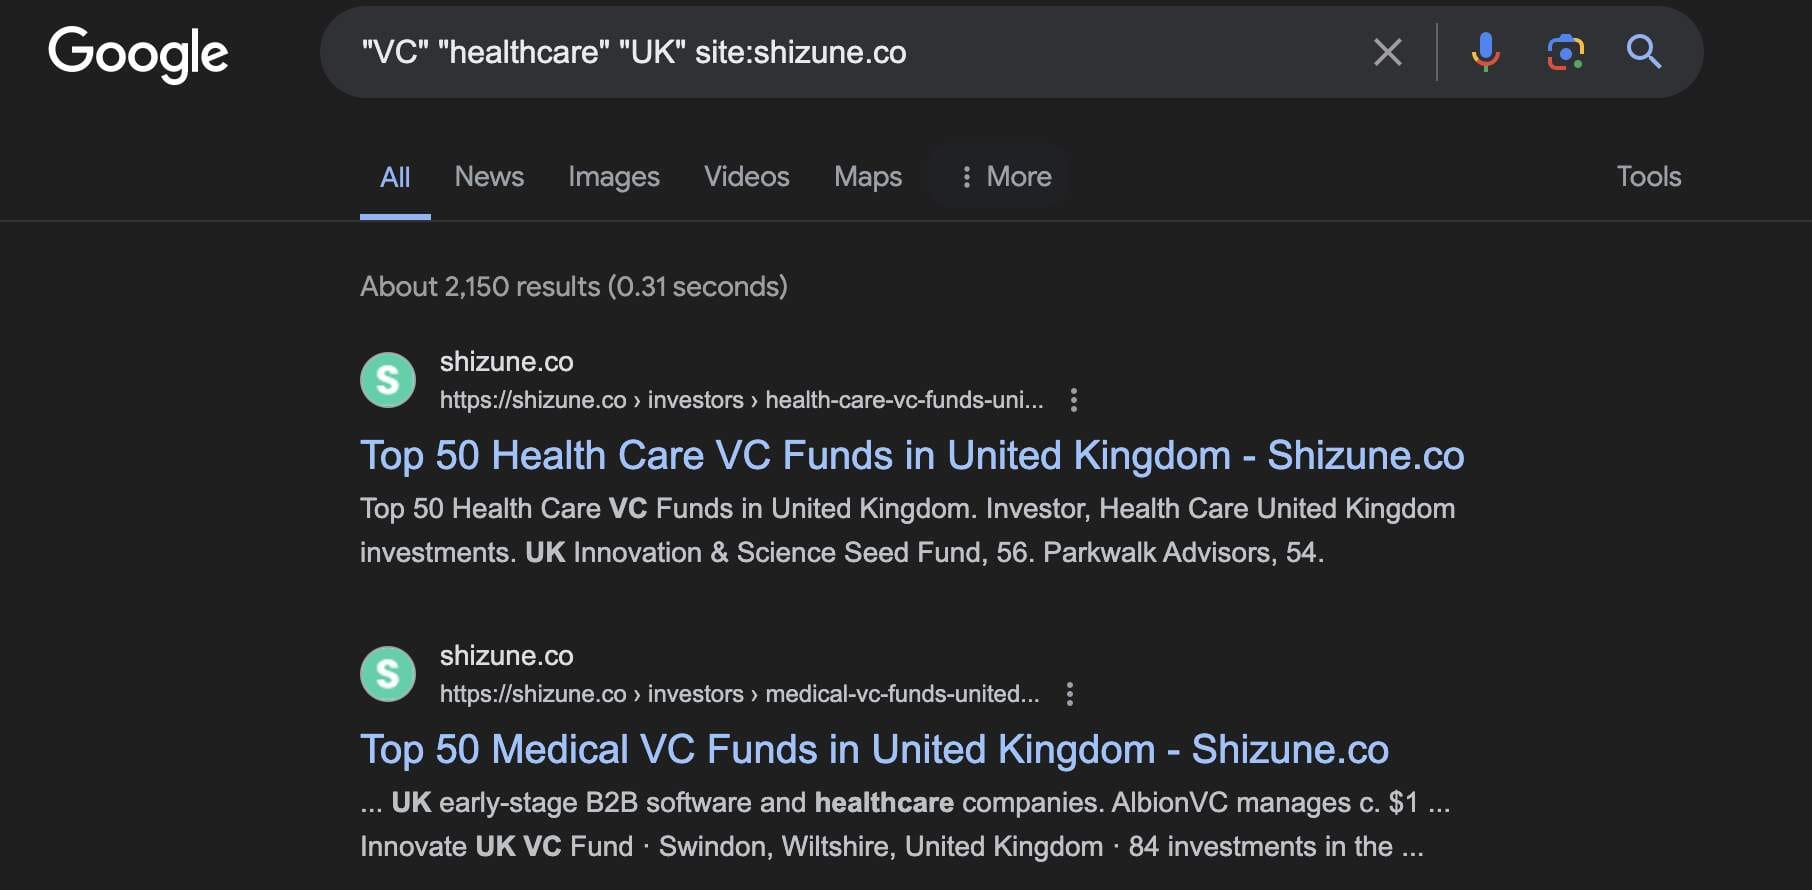 Search for exact matches on VC, healthcare, and UK keywords within shizune.co